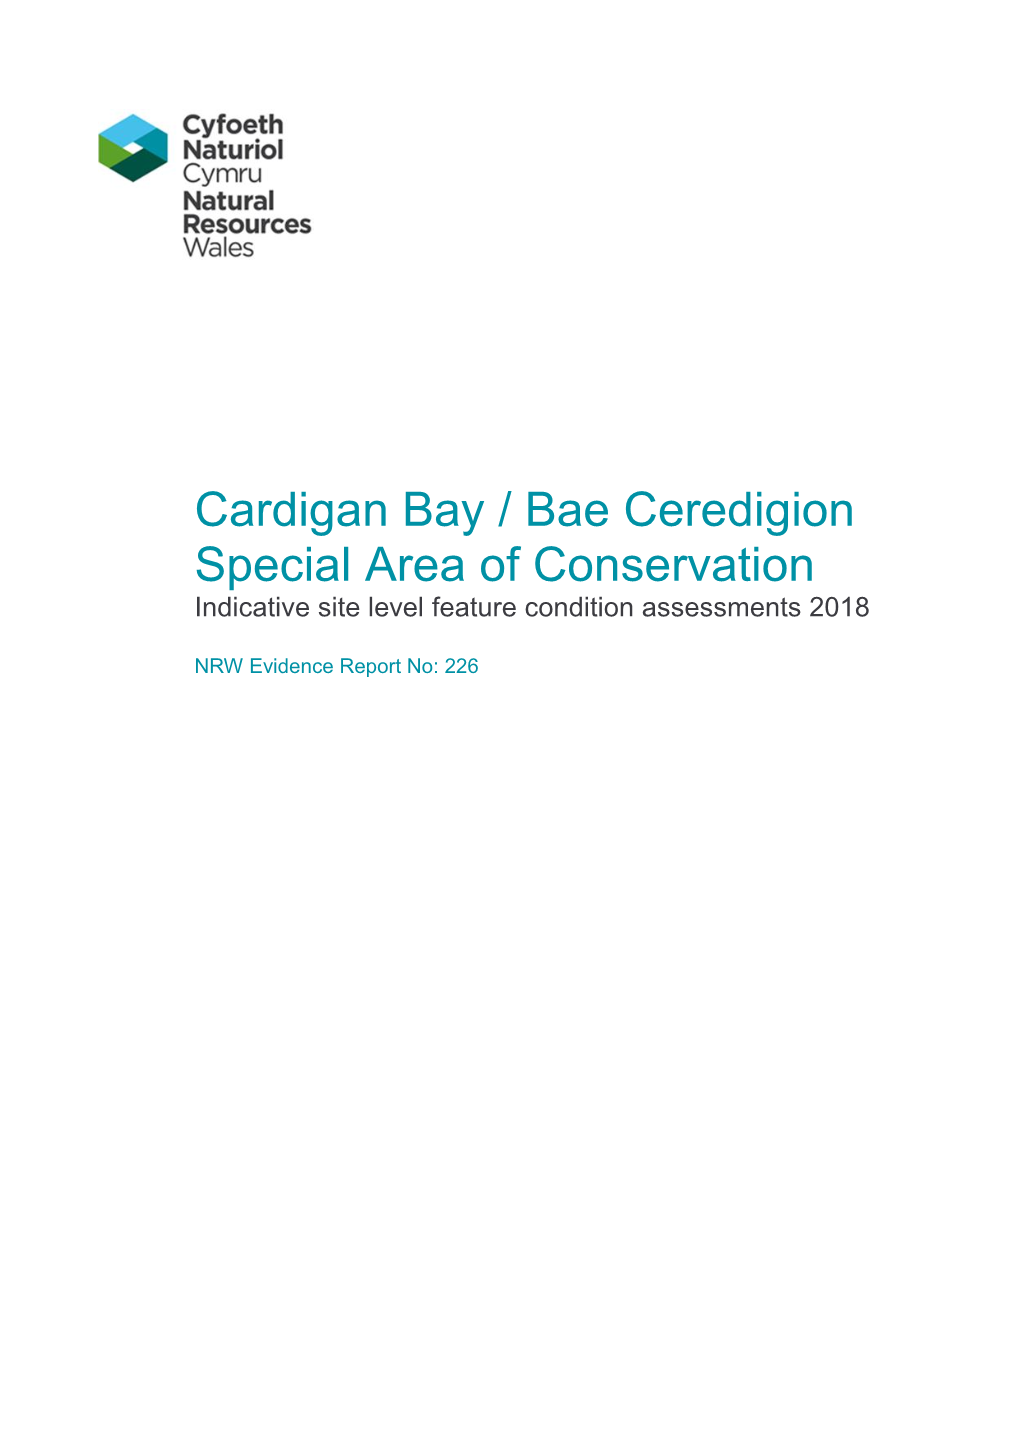 Cardigan Bay / Bae Ceredigion Special Area of Conservation Indicative Site Level Feature Condition Assessments 2018